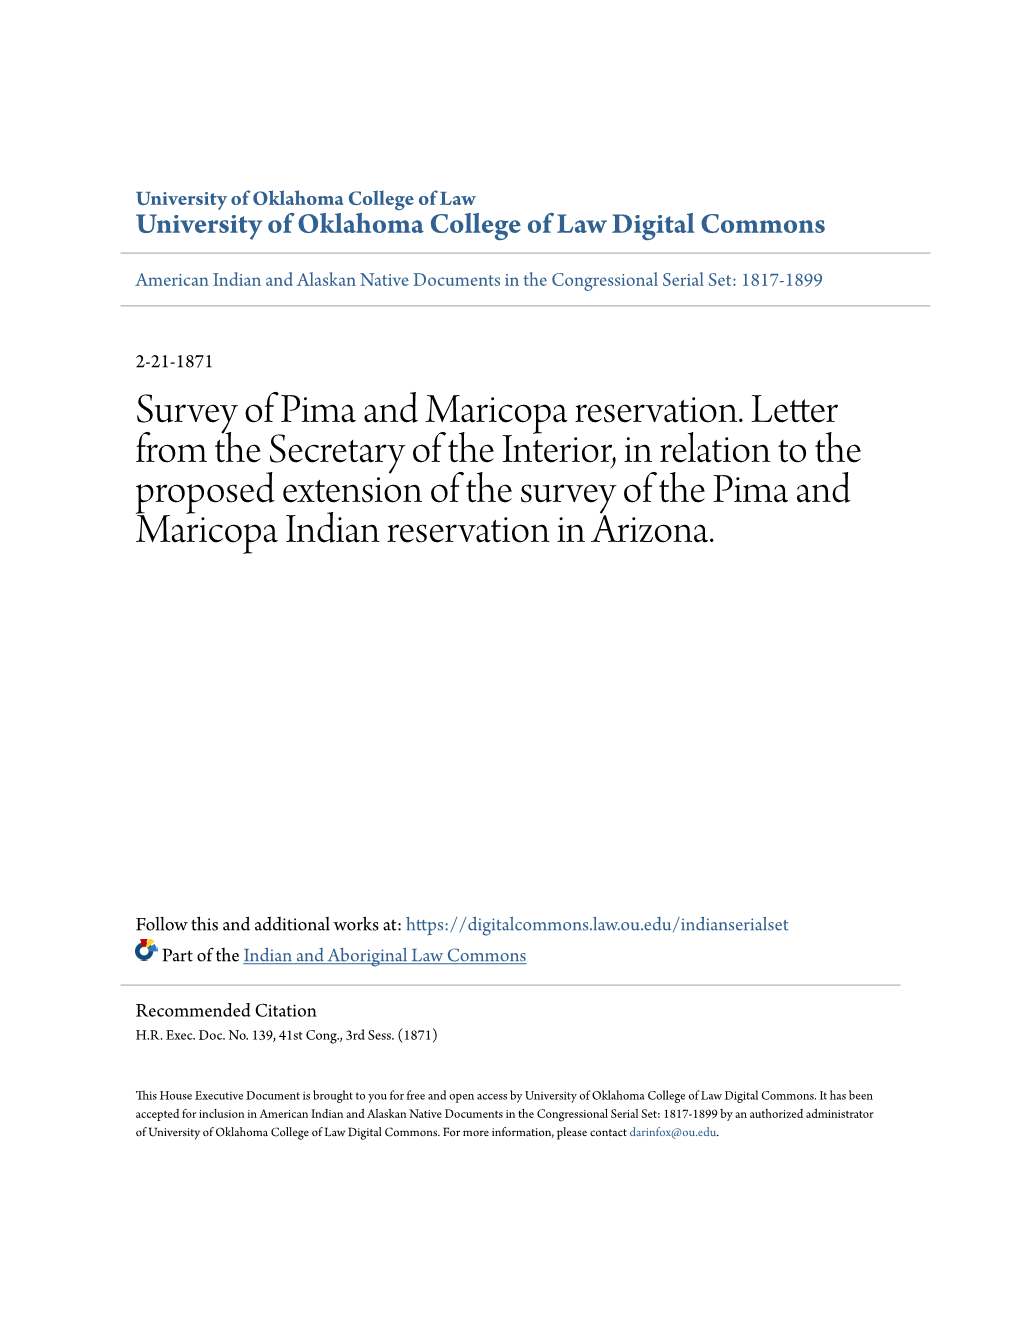 Survey of Pima and Maricopa Reservation. Letter from the Secretary of the Interior, in Relation to the Proposed Extension Of